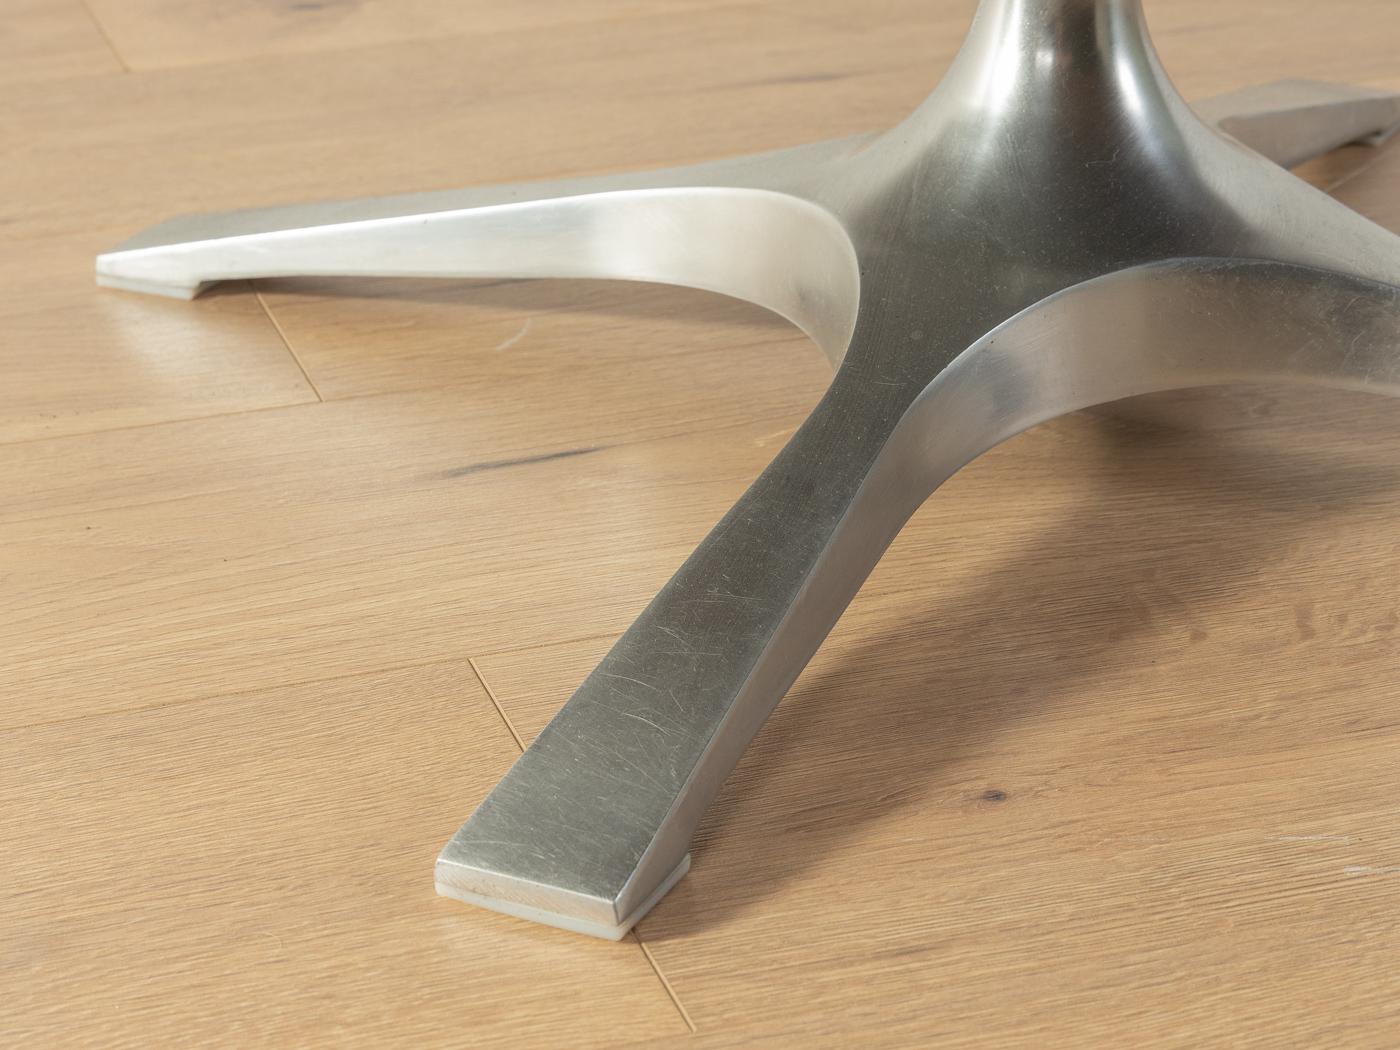 Aluminum De Sede Stool DS-31 in Buffalo Leather from 1970s